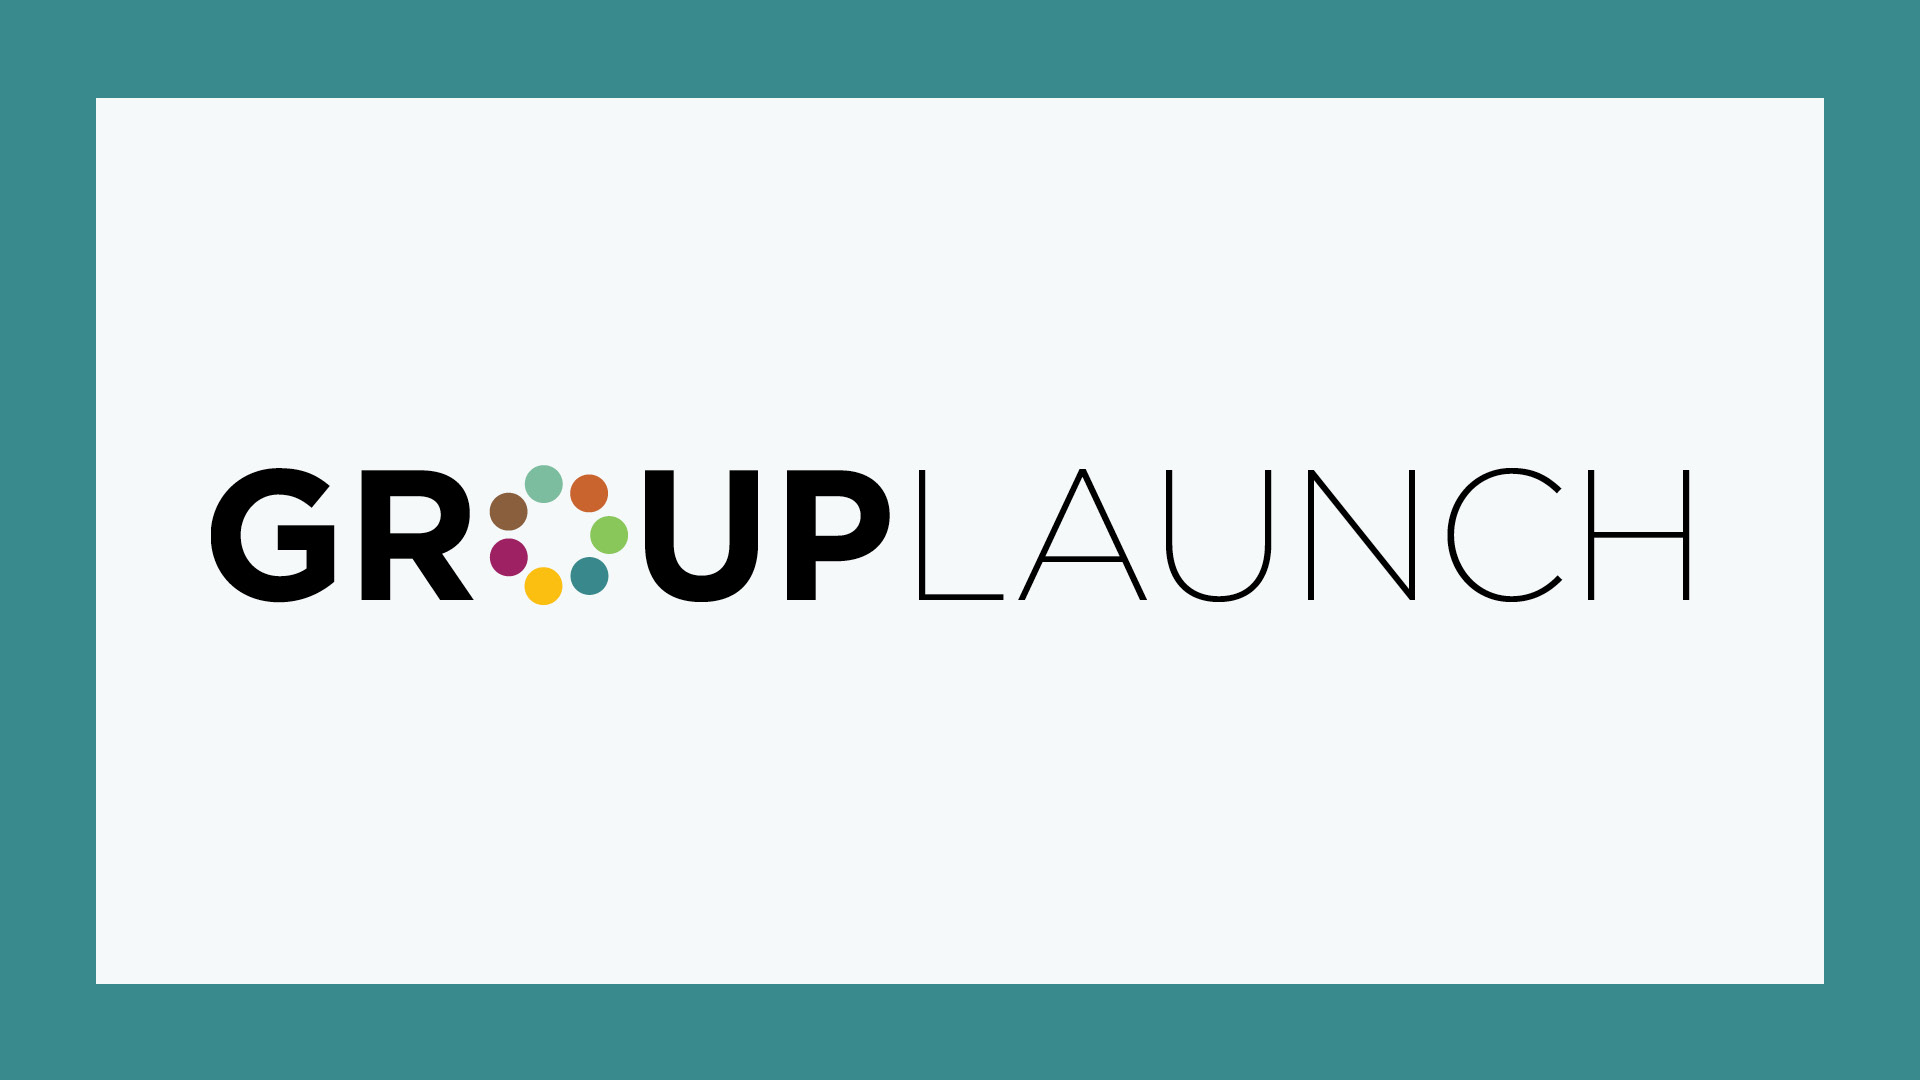 Group Launch